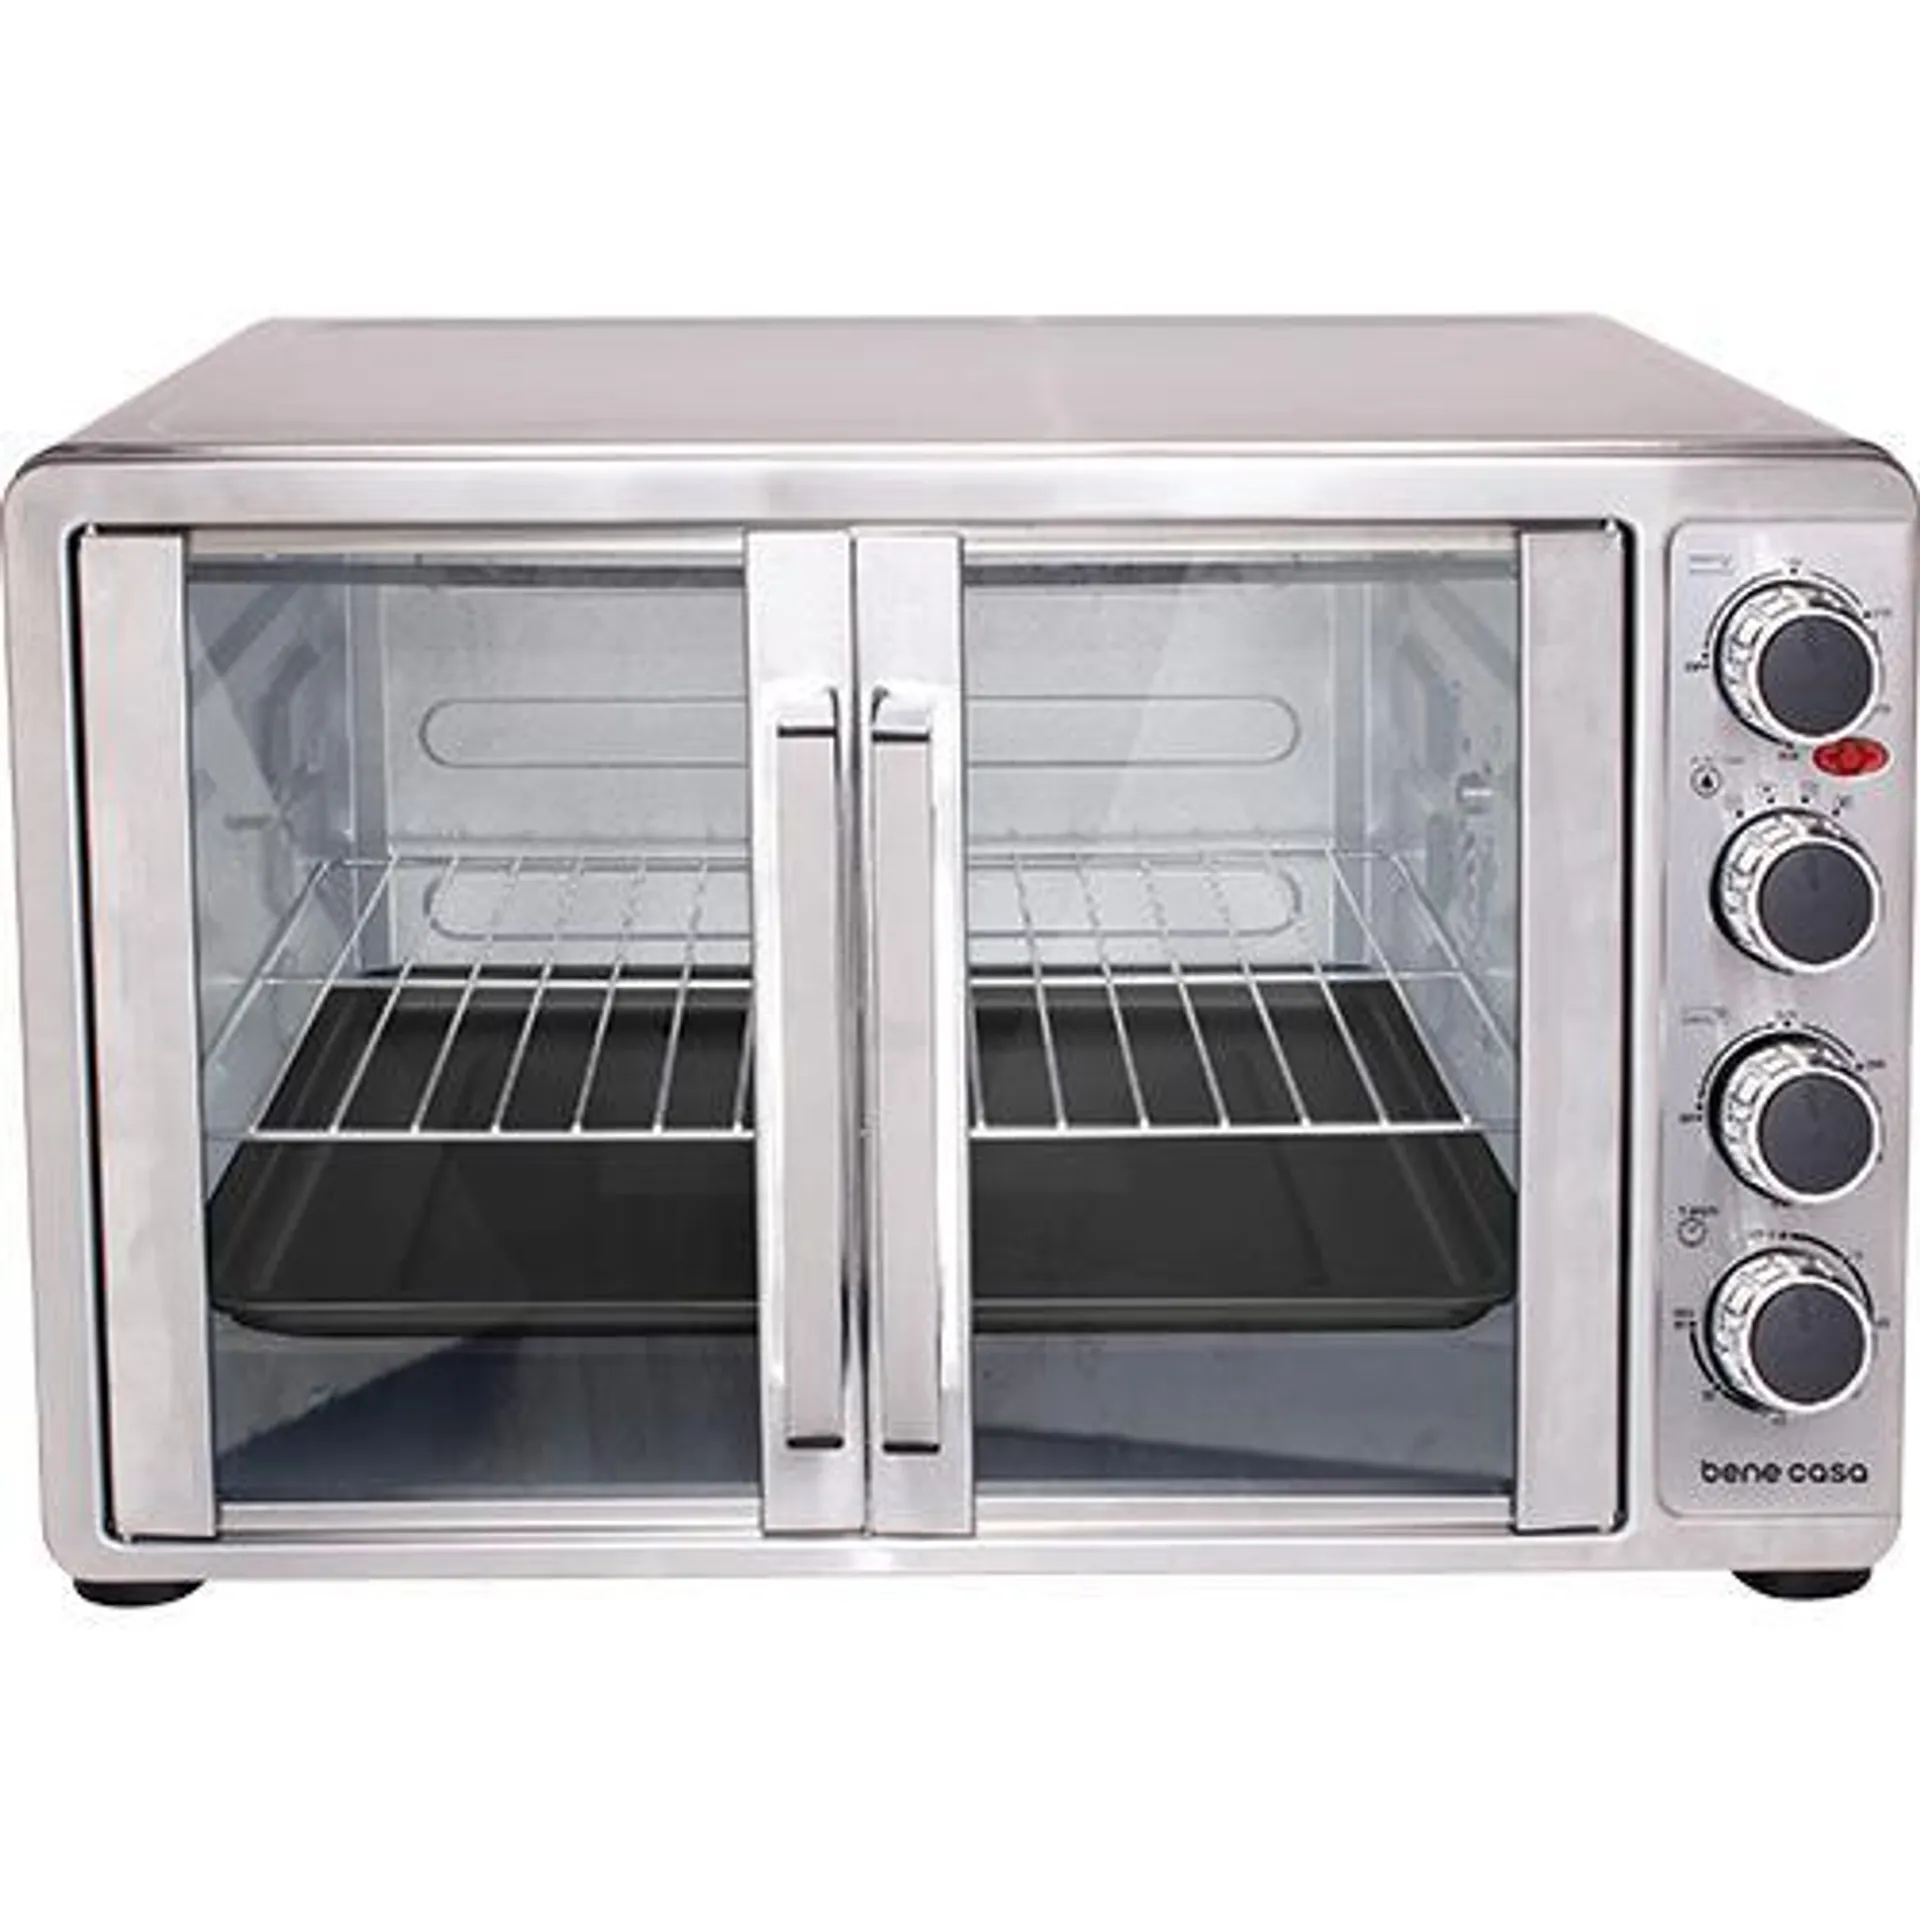 45L French Door Convection Oven With Rotisserie - Stainless Steel